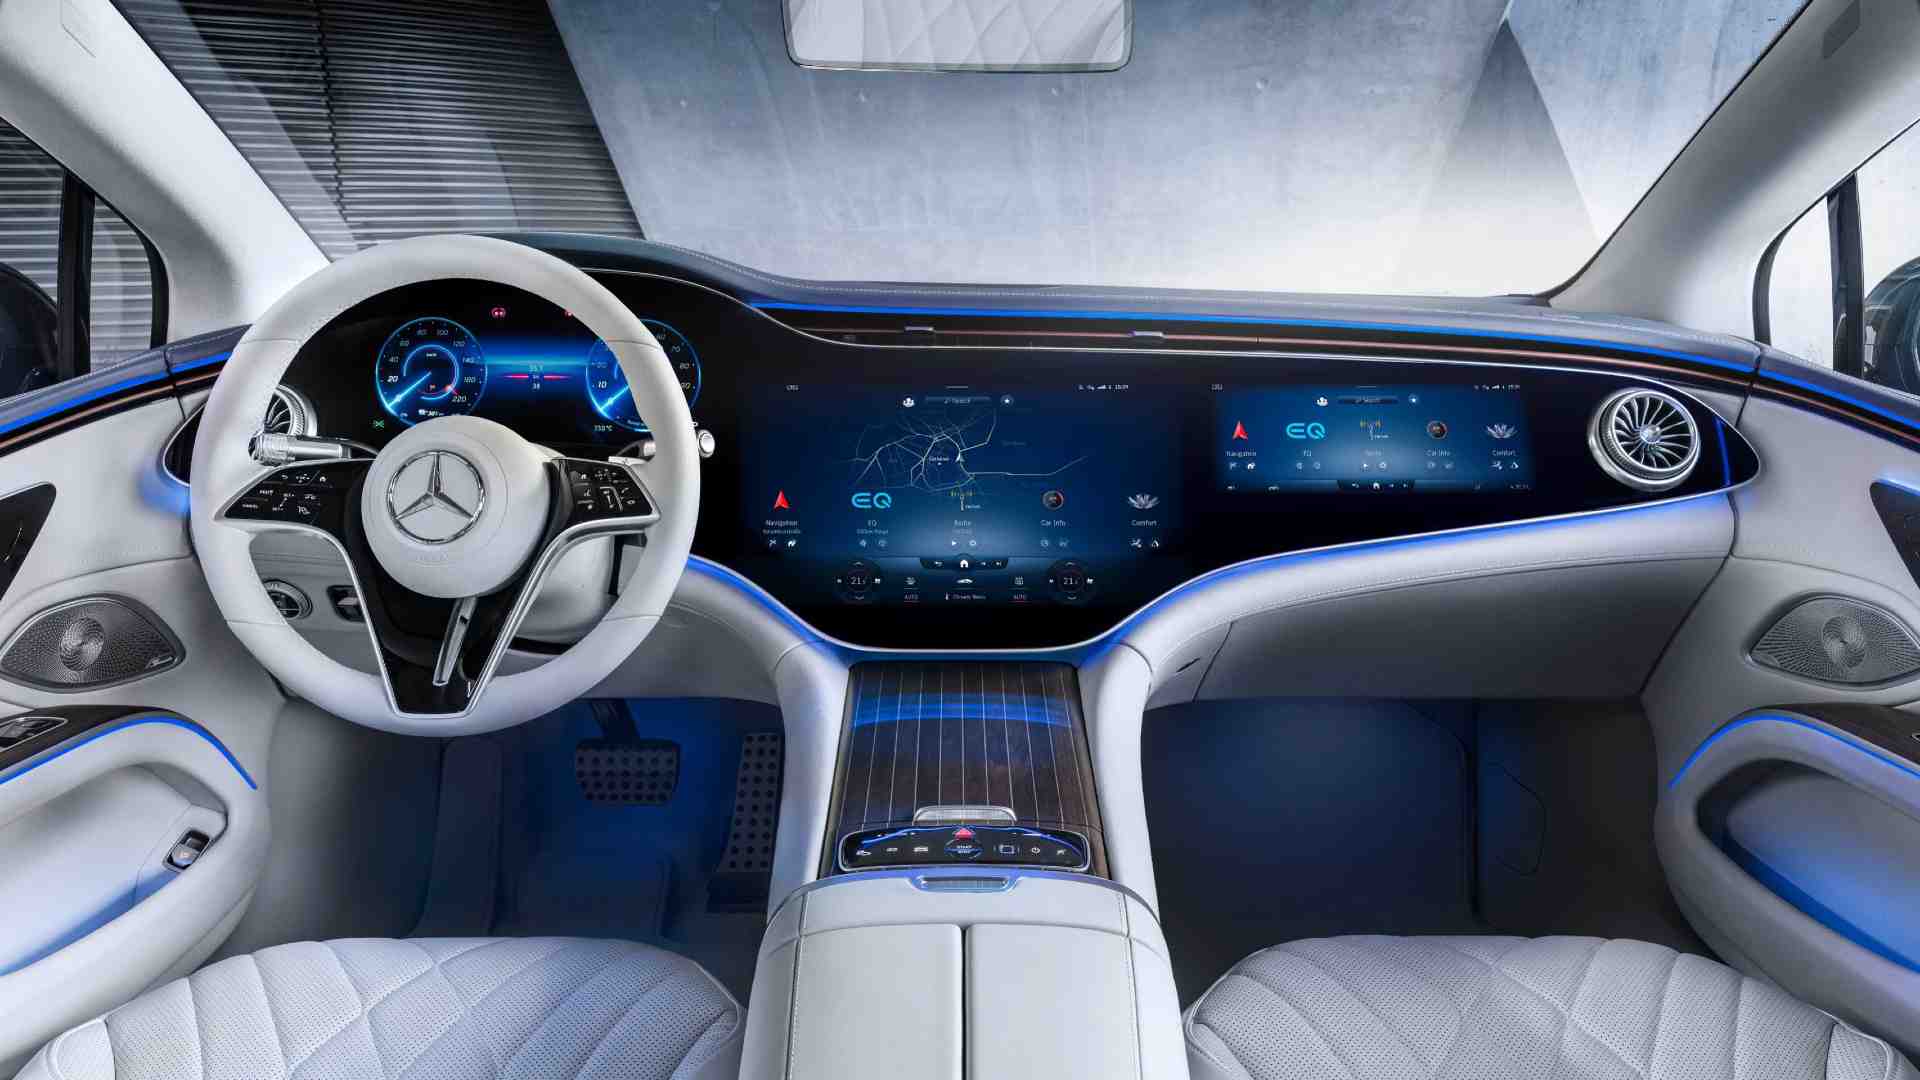 The Mercedes-Benz EQS debuts the MBUX Hyperscreen with three digital displays installed under a curved glass panel. Image: Mercedes-Benz